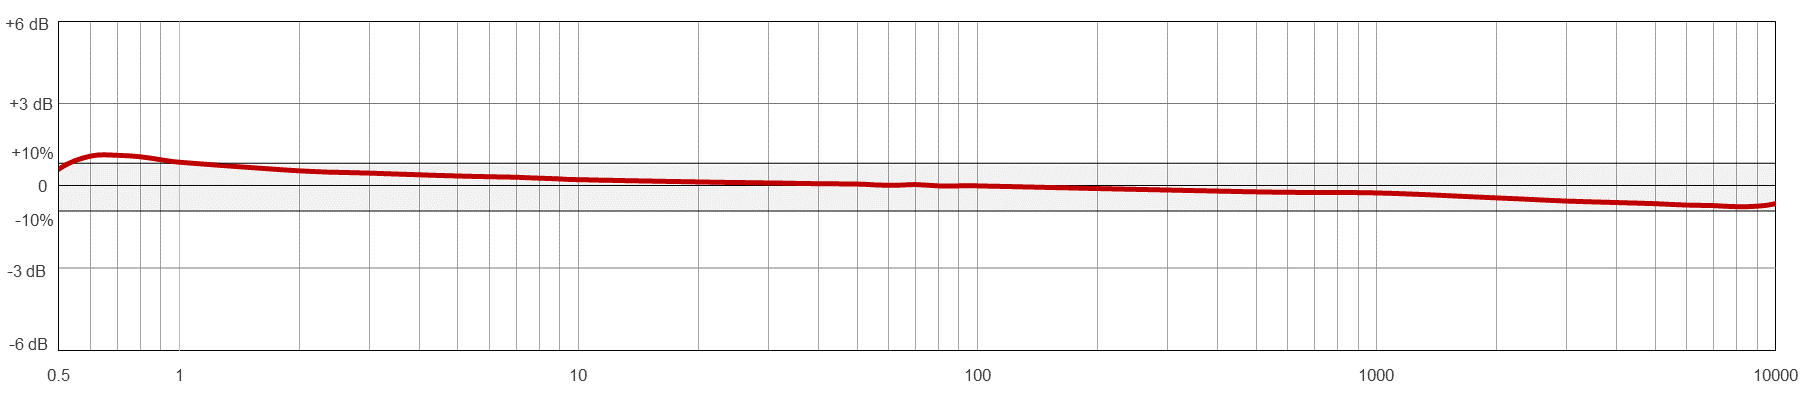 AC184TYPICAL FREQUENCY RESPONSE